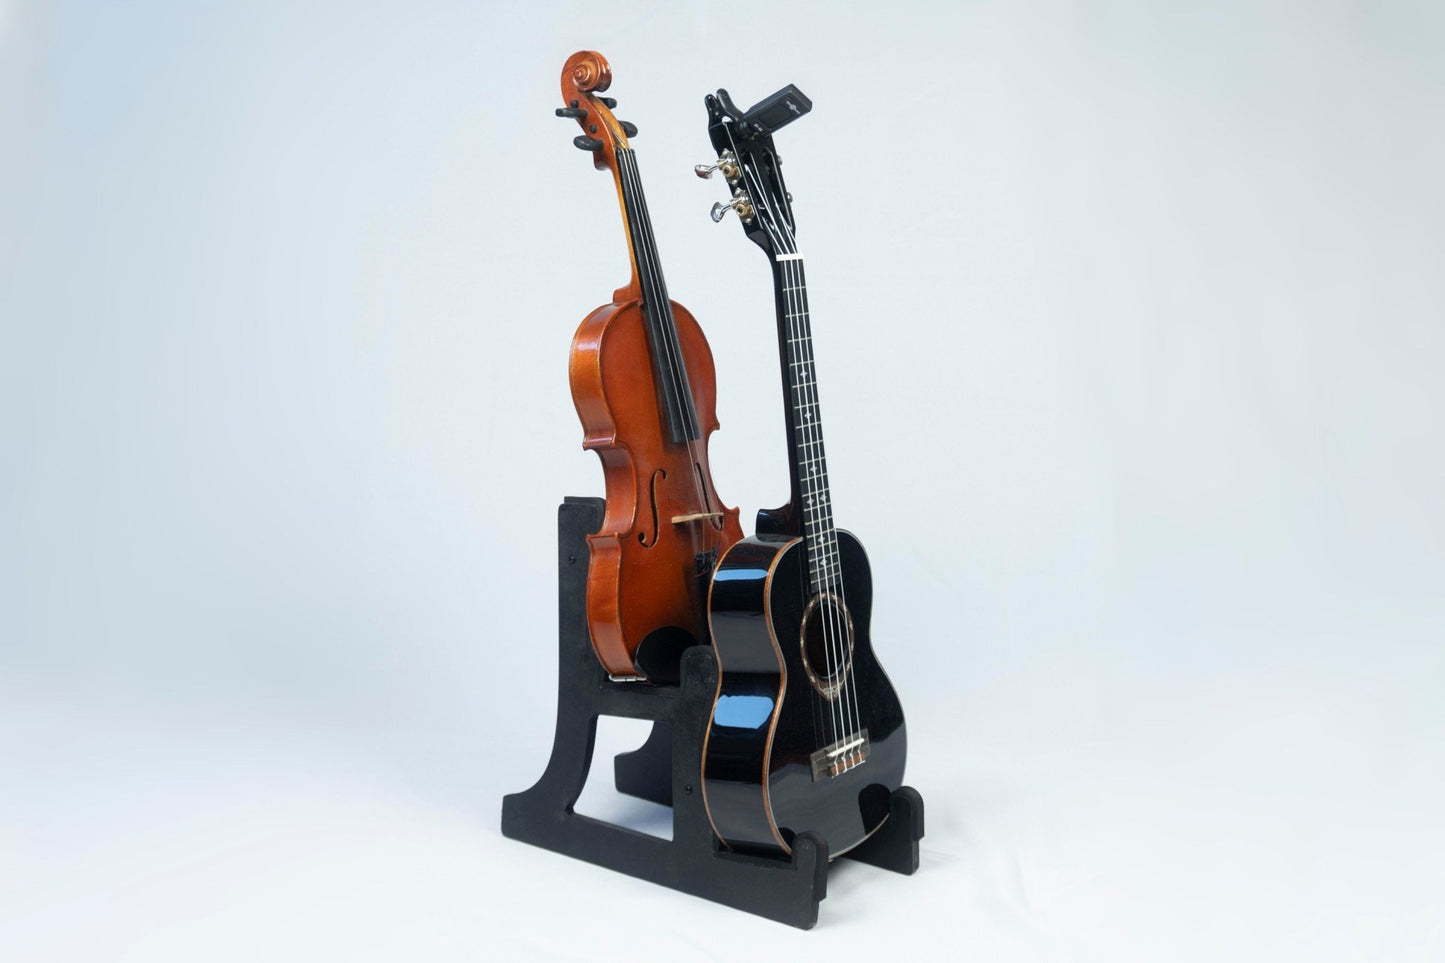 Double Decker Ukulele Stand, Customisable for Two/2 Ukes, Mandolin, Violin and more, Made In Ireland - Caulfield Composites Standard Natural Birch